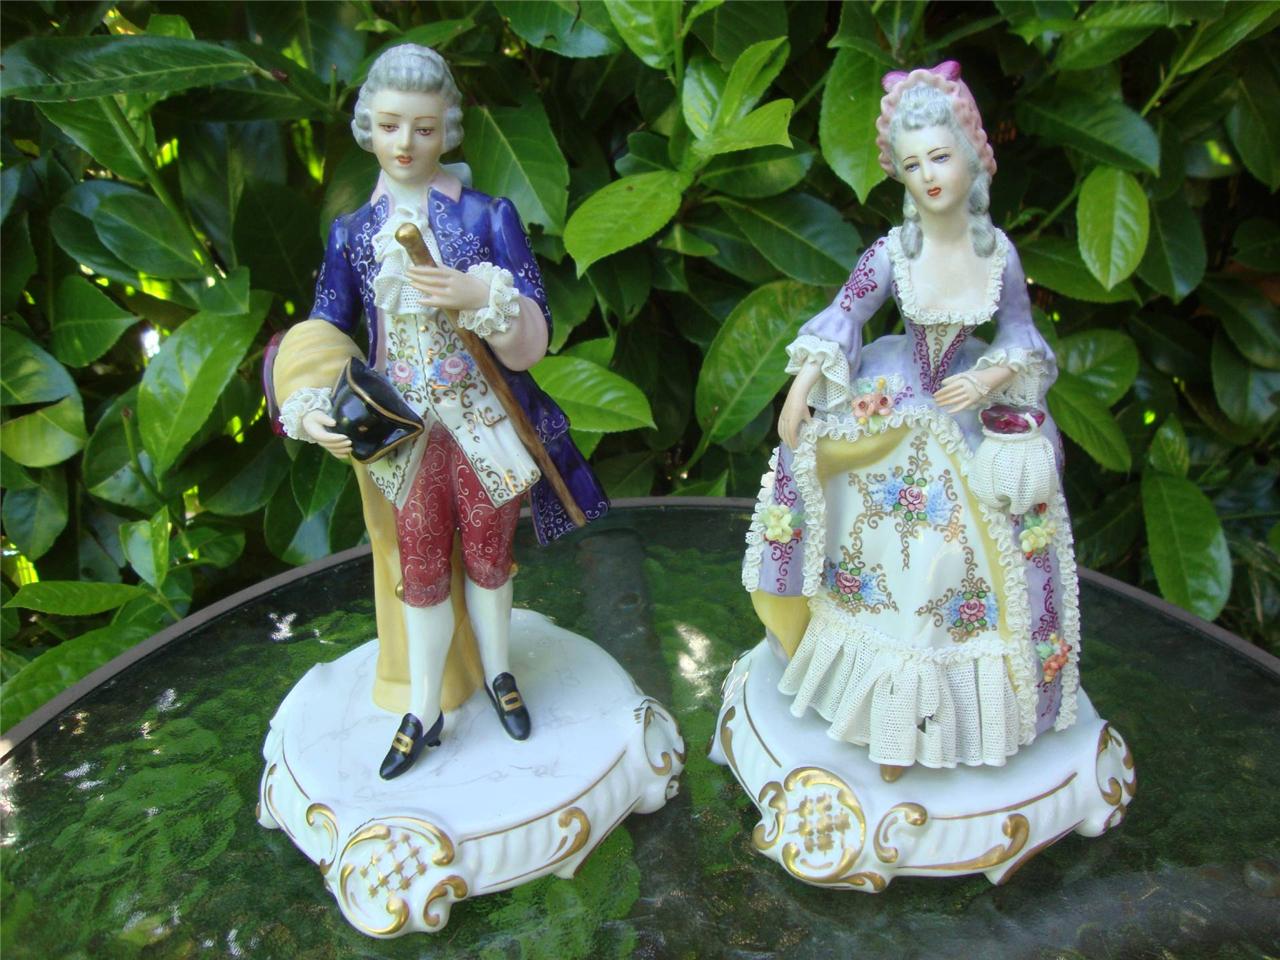 LOVELY PAIR PORCELAIN CAPODIMONTE FIGURES OF LADY AND GENT DRESDEN LACE - Bild 1 von 1